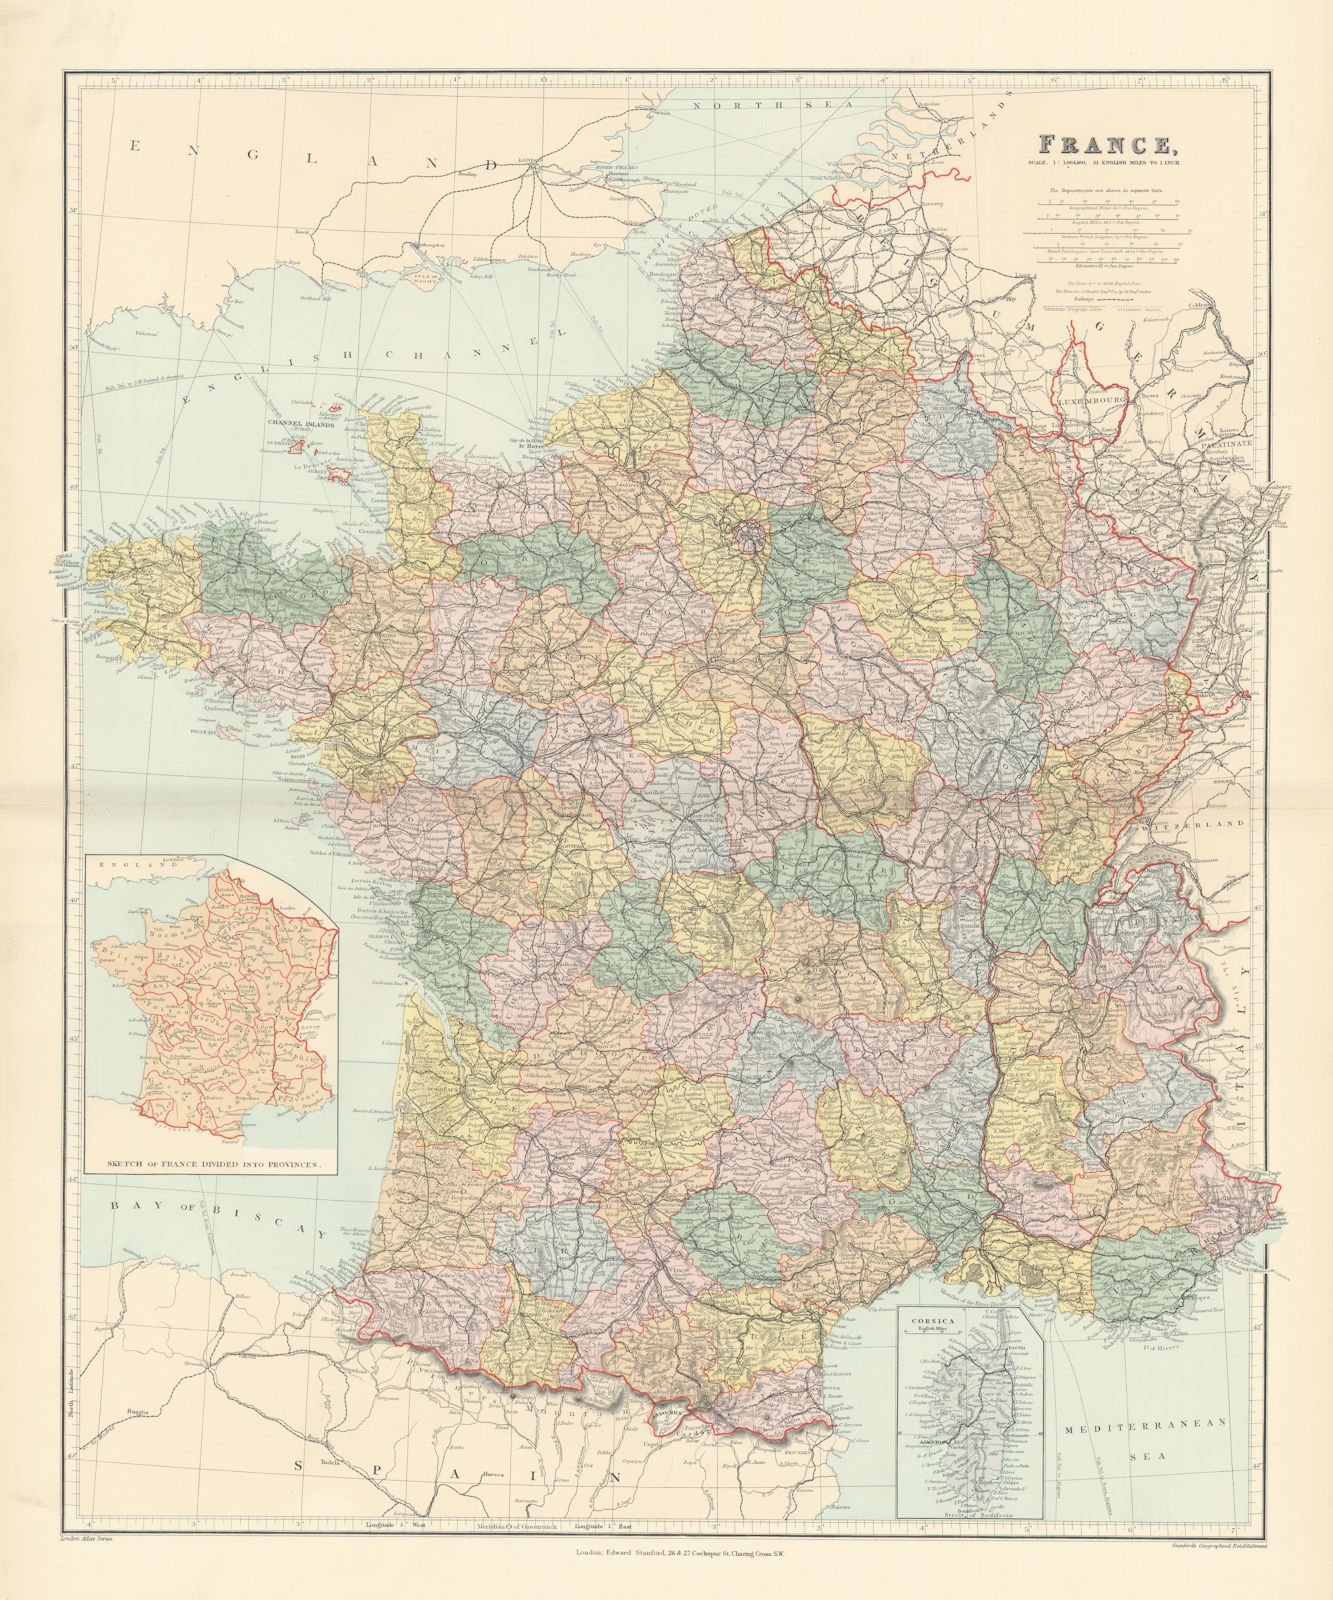 France in departements without Alsace Lorraine. Large 65x54cm. STANFORD 1896 map